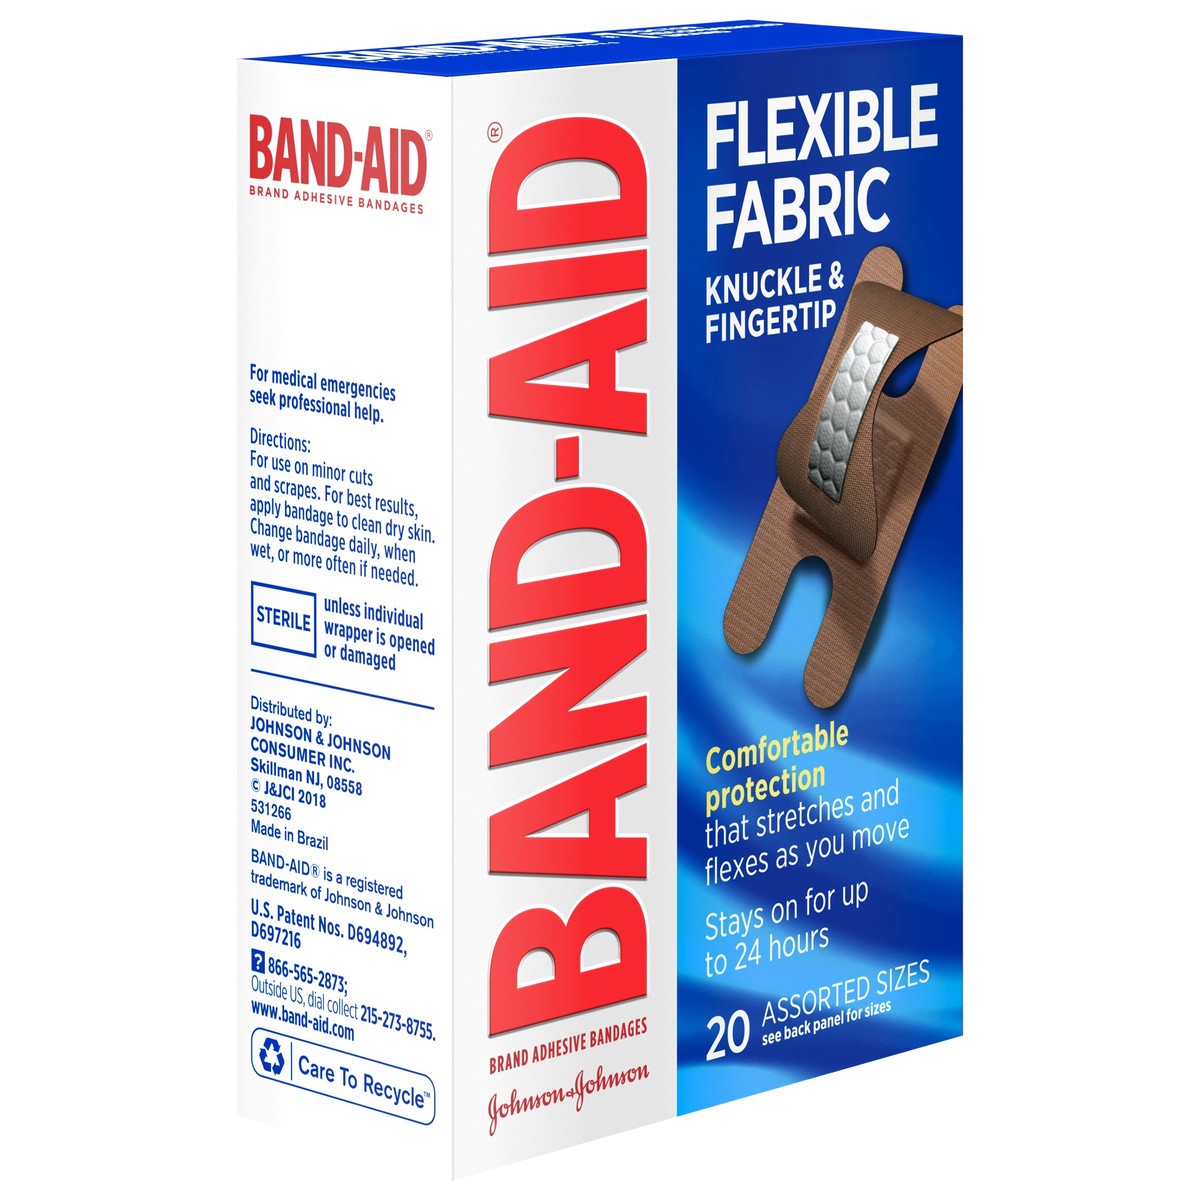 slide 2 of 7, BAND-AID Sterile Flexible Fabric Adhesive Bandages, For Protection & Wound Care of Minor Cuts & Burns, With Quilt-Aid Technology to Cushion Painful Wounds, Finger & Knuckle, 20 ct, 20 ct